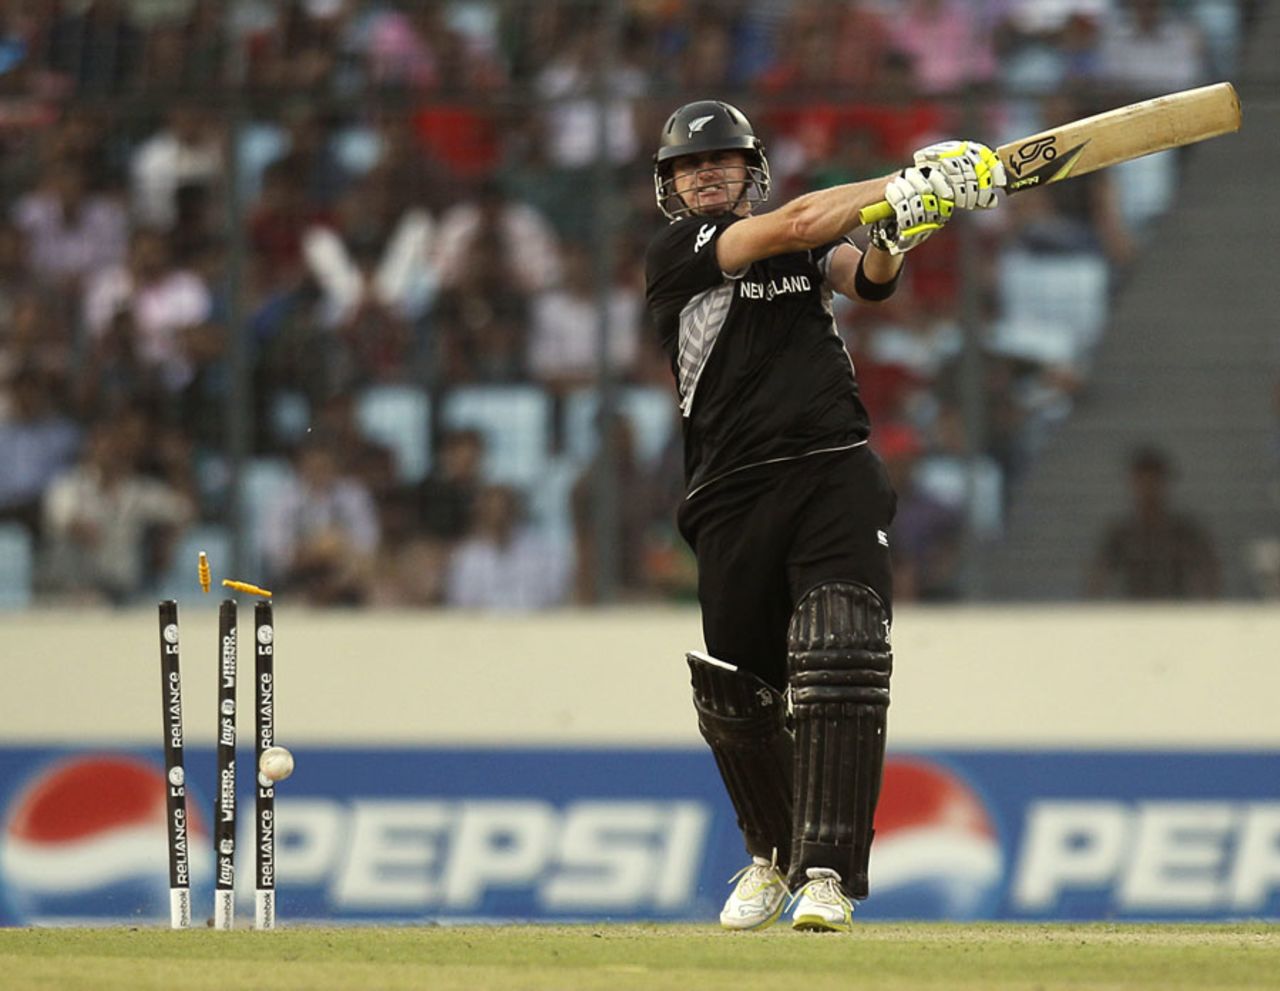 Scott Styris edged the ball on to his stumps, New Zealand v South Africa, 3rd quarter-final, Mirpur, World Cup 2011, March 25, 2011